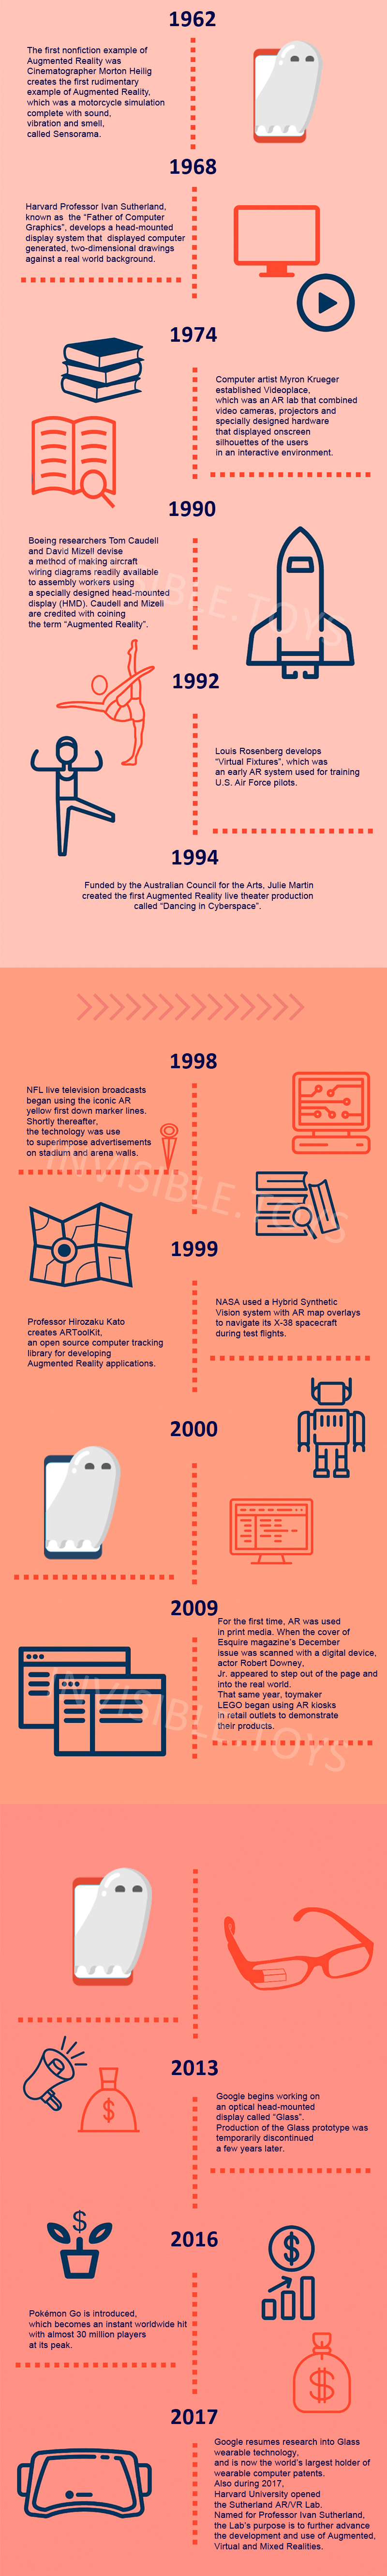 timeline of augmented reality